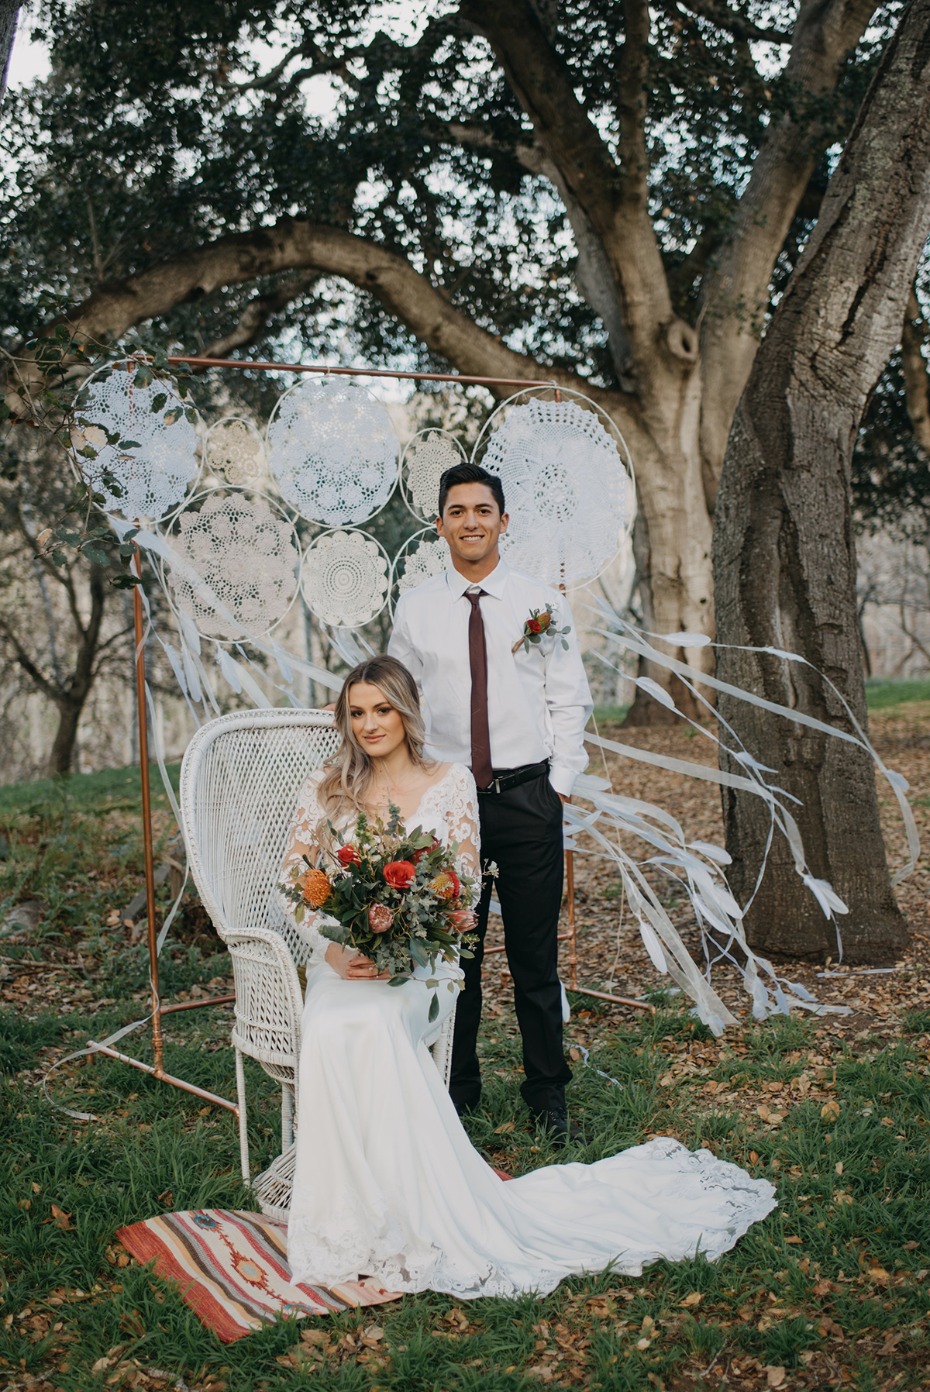 bride and groom with doily dreamcatcher backdrop